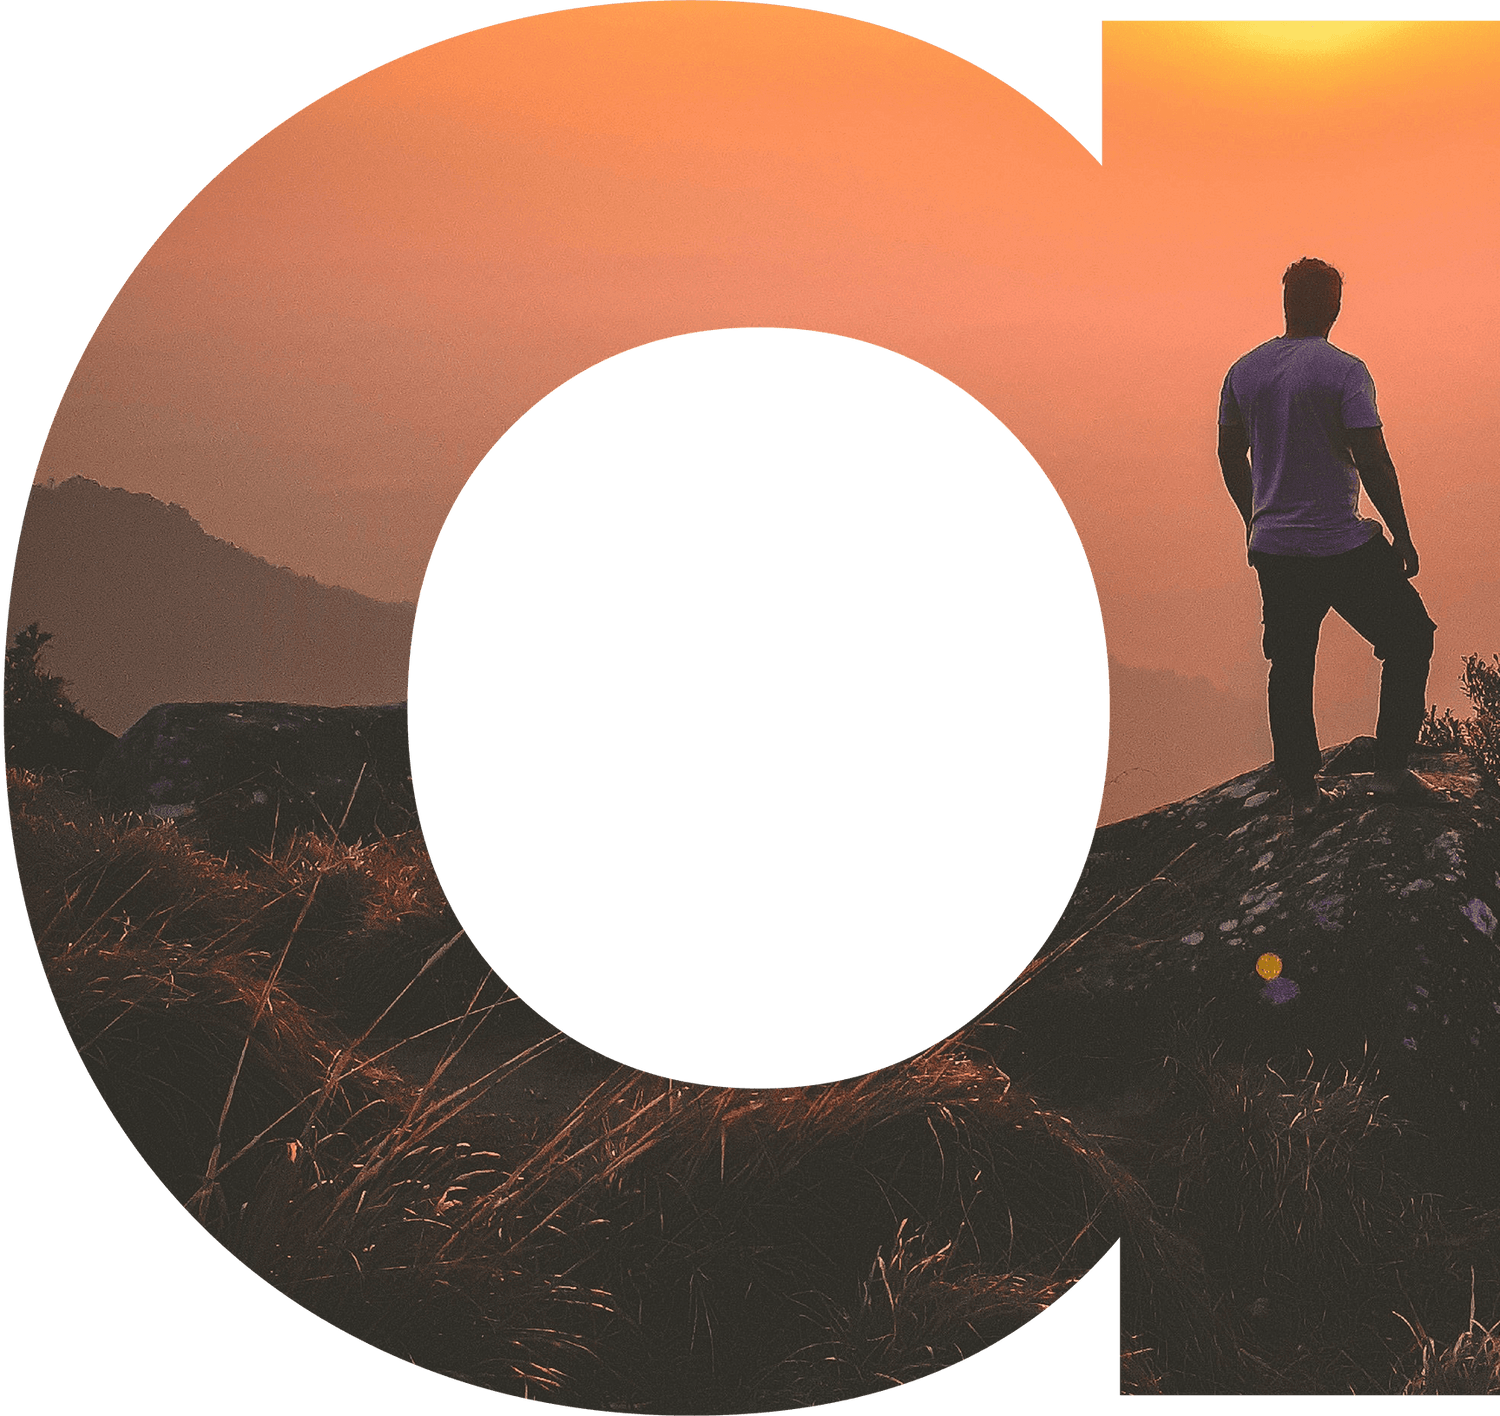 Man standing on mountain at sunset inside a letter 'O' shape with scenic landscape, promoting Goeazy adventures.